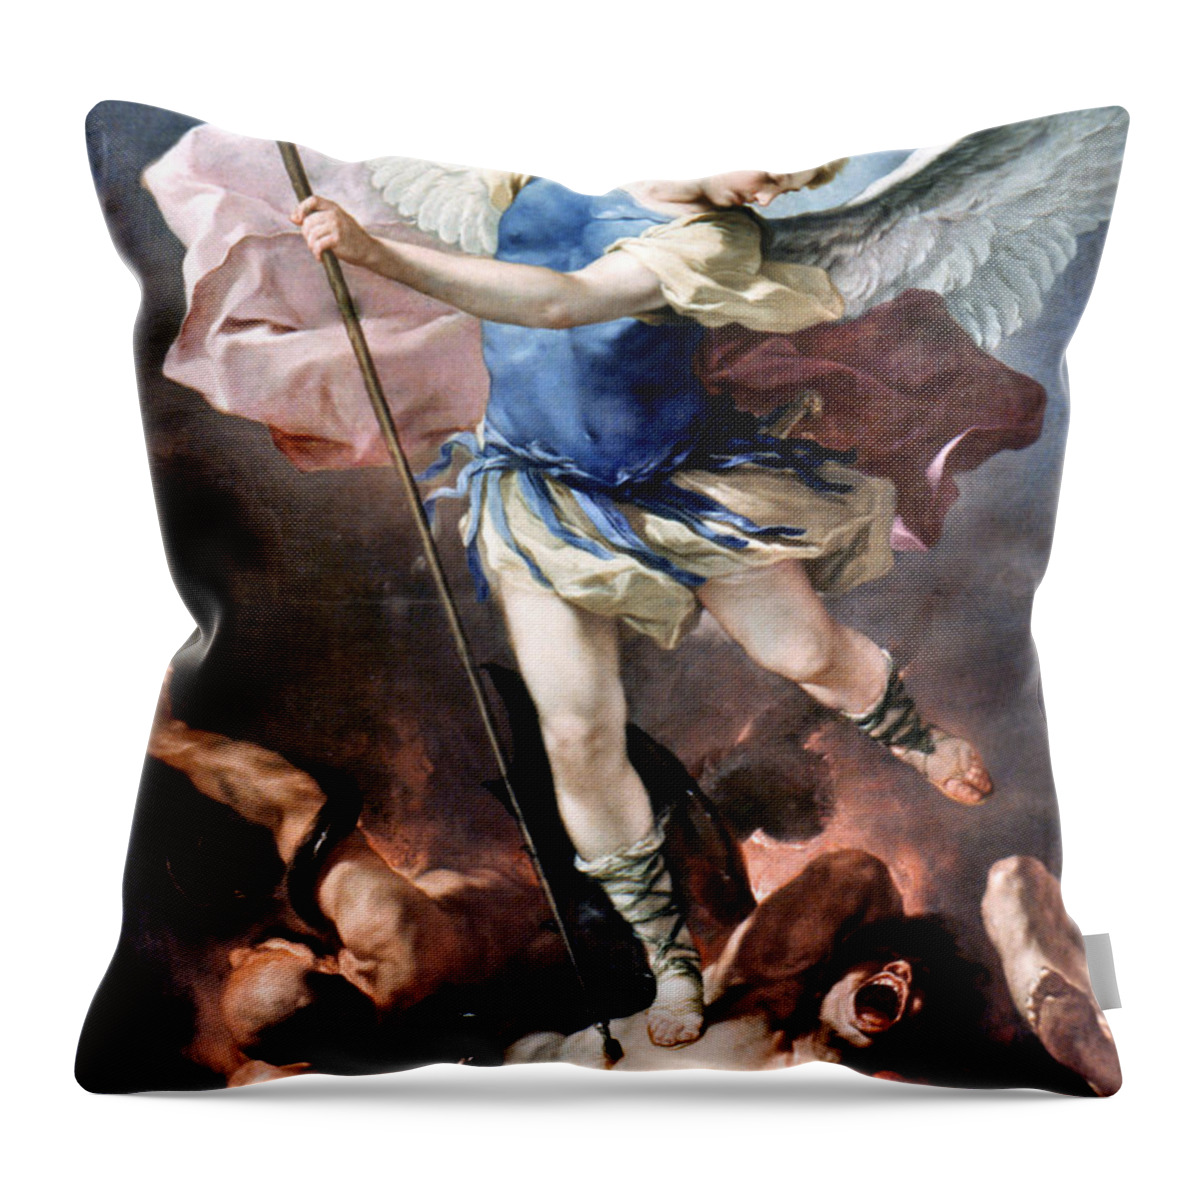 Aod Throw Pillow featuring the painting The Archangel Michael by Luca Giordano